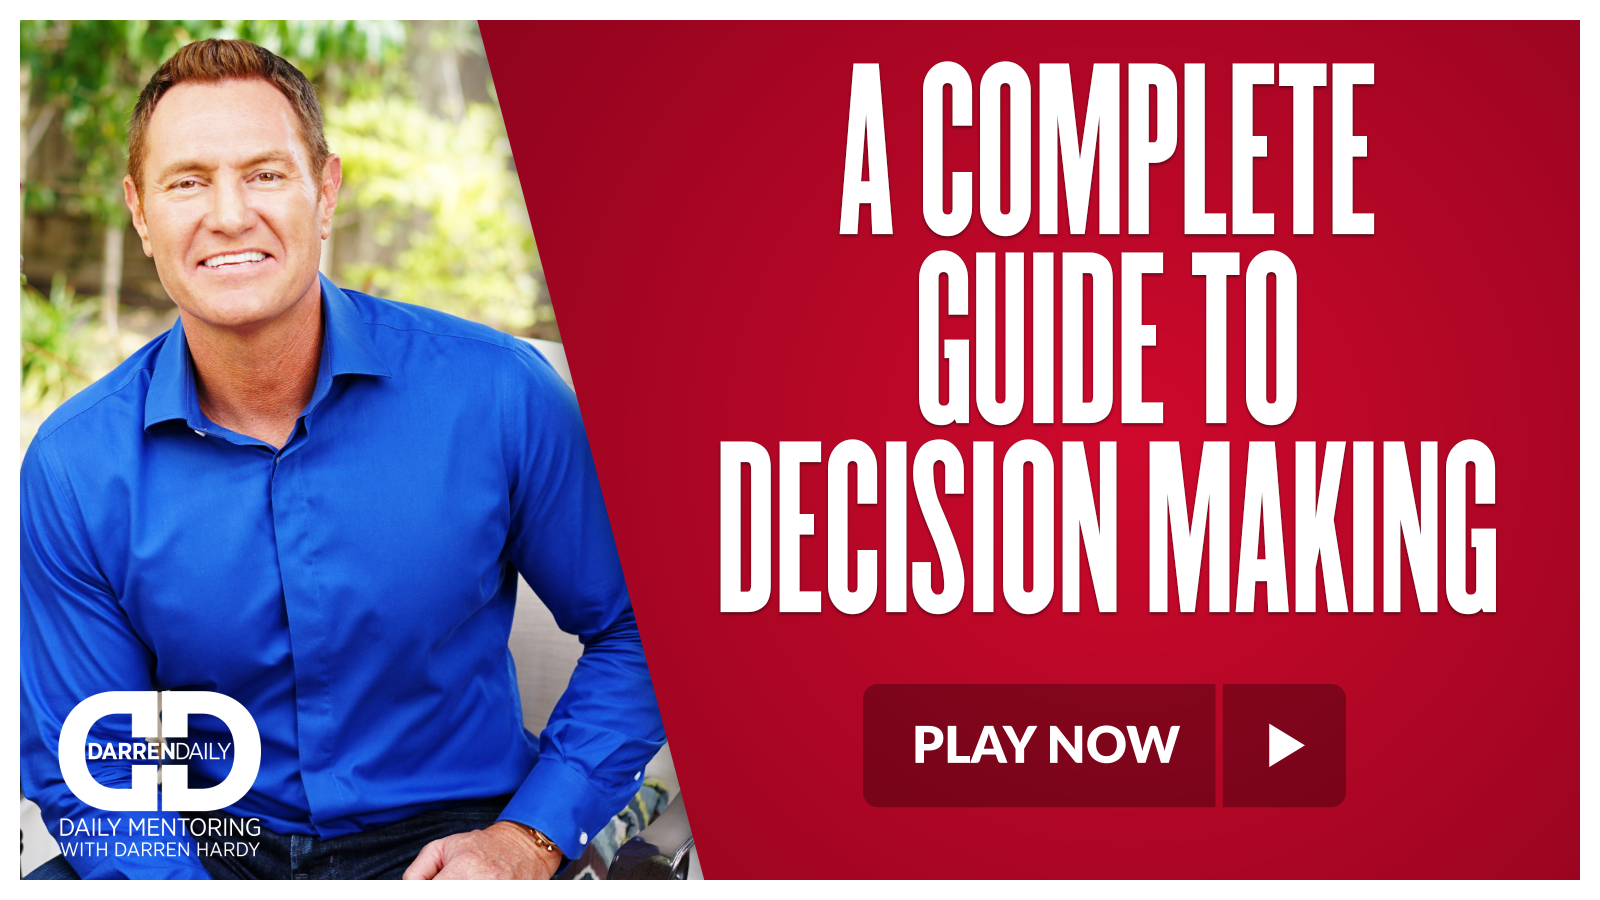 A Complete Guide to Decision Making